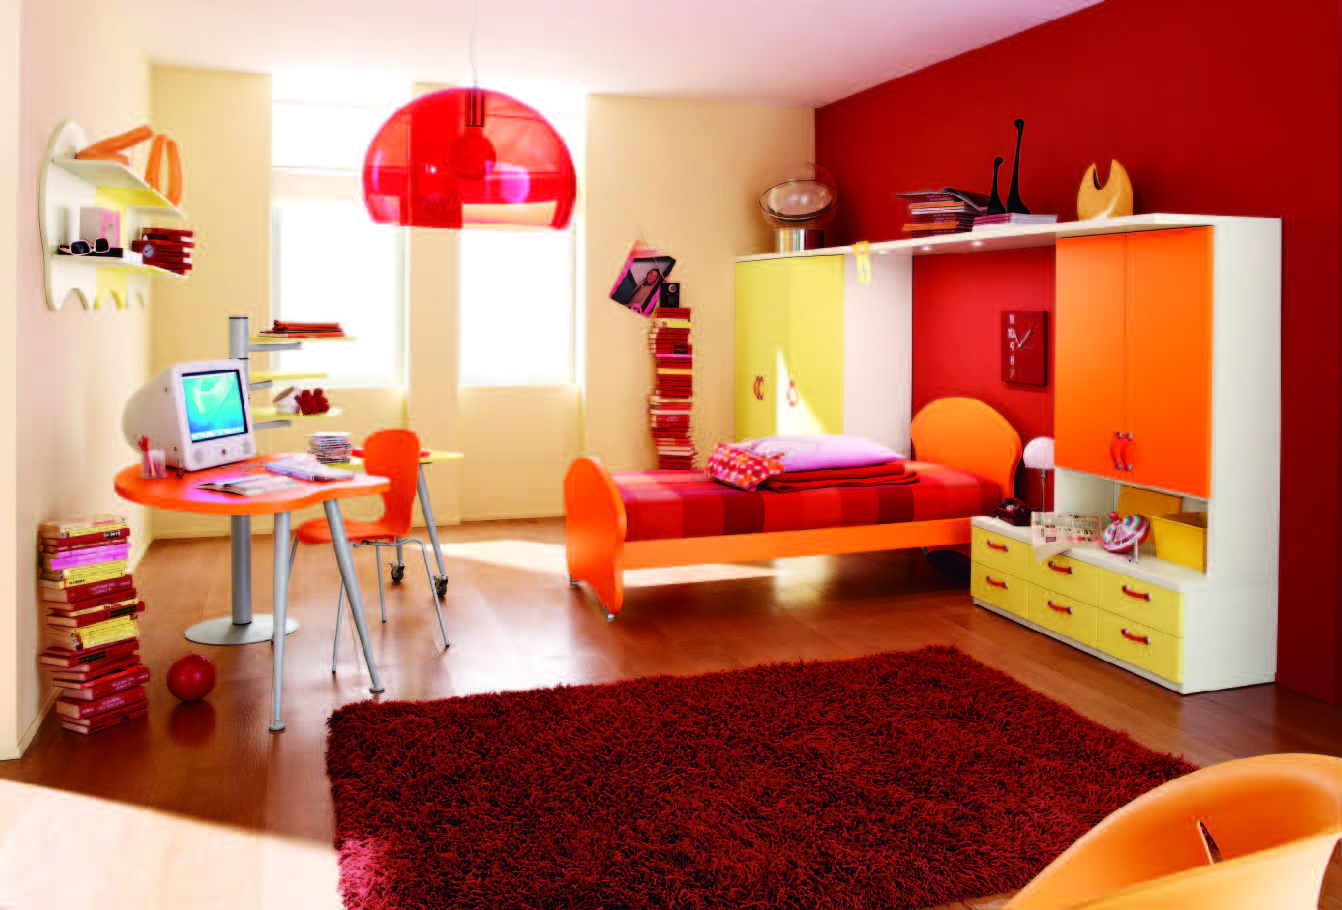 50 Super Fun And Colorful Kids Bedroom Ideas to Inspire You Today ➤ Discover the season's newest designs and inspirations for your kids. Visit us at www.kidsbedroomideas.eu #KidsBedroomIdeas #KidsBedrooms #KidsBedroomDesigns @KidsBedroomBlog